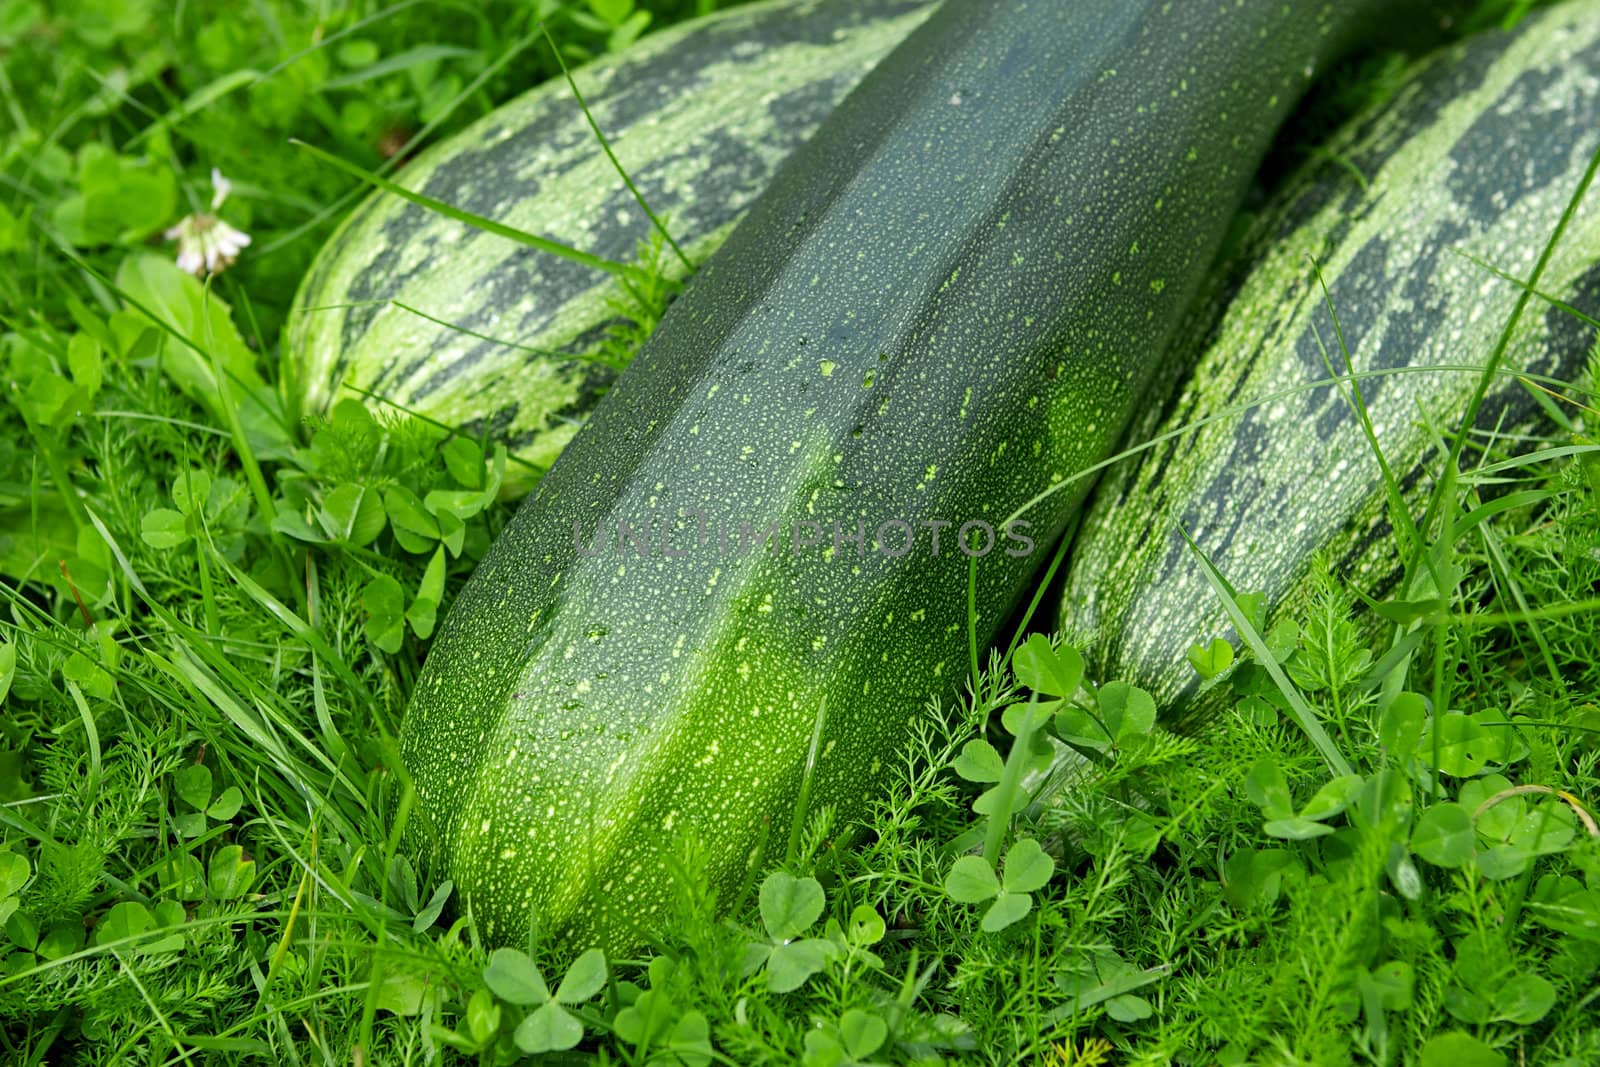 Zucchini on the green grass background